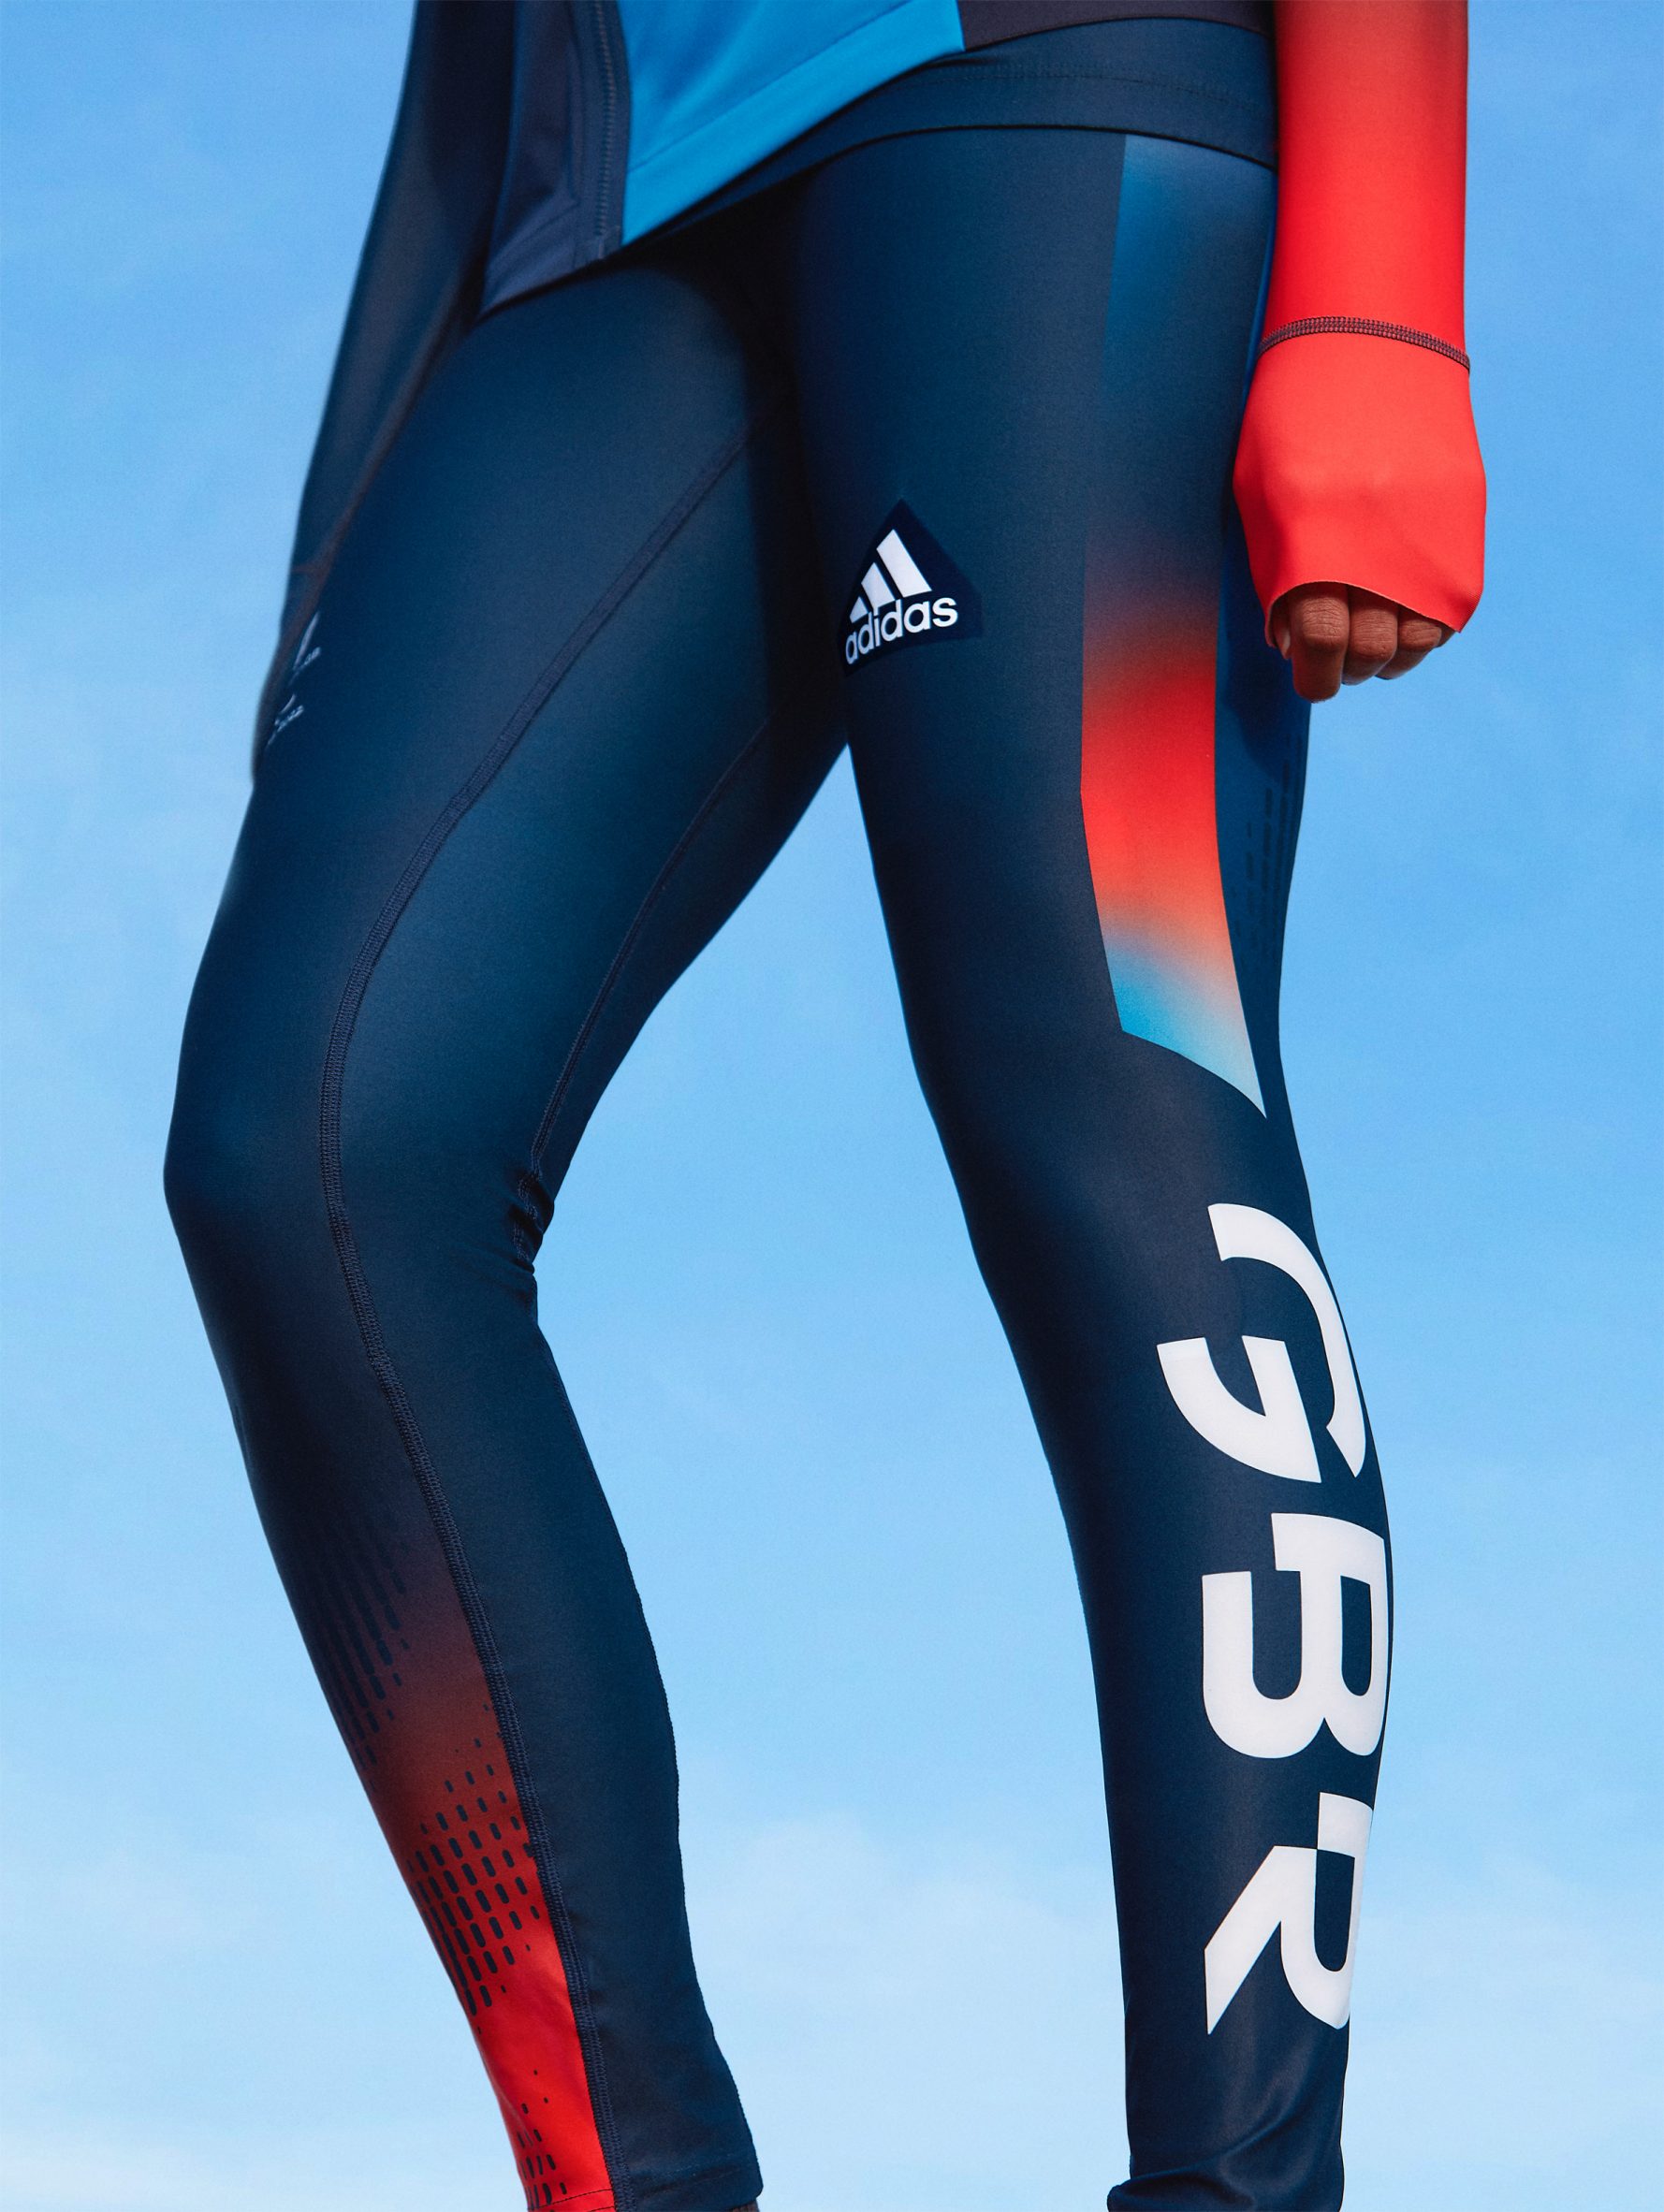 Adidas leggings for the Bejing Winter Olympic Team GB athletes